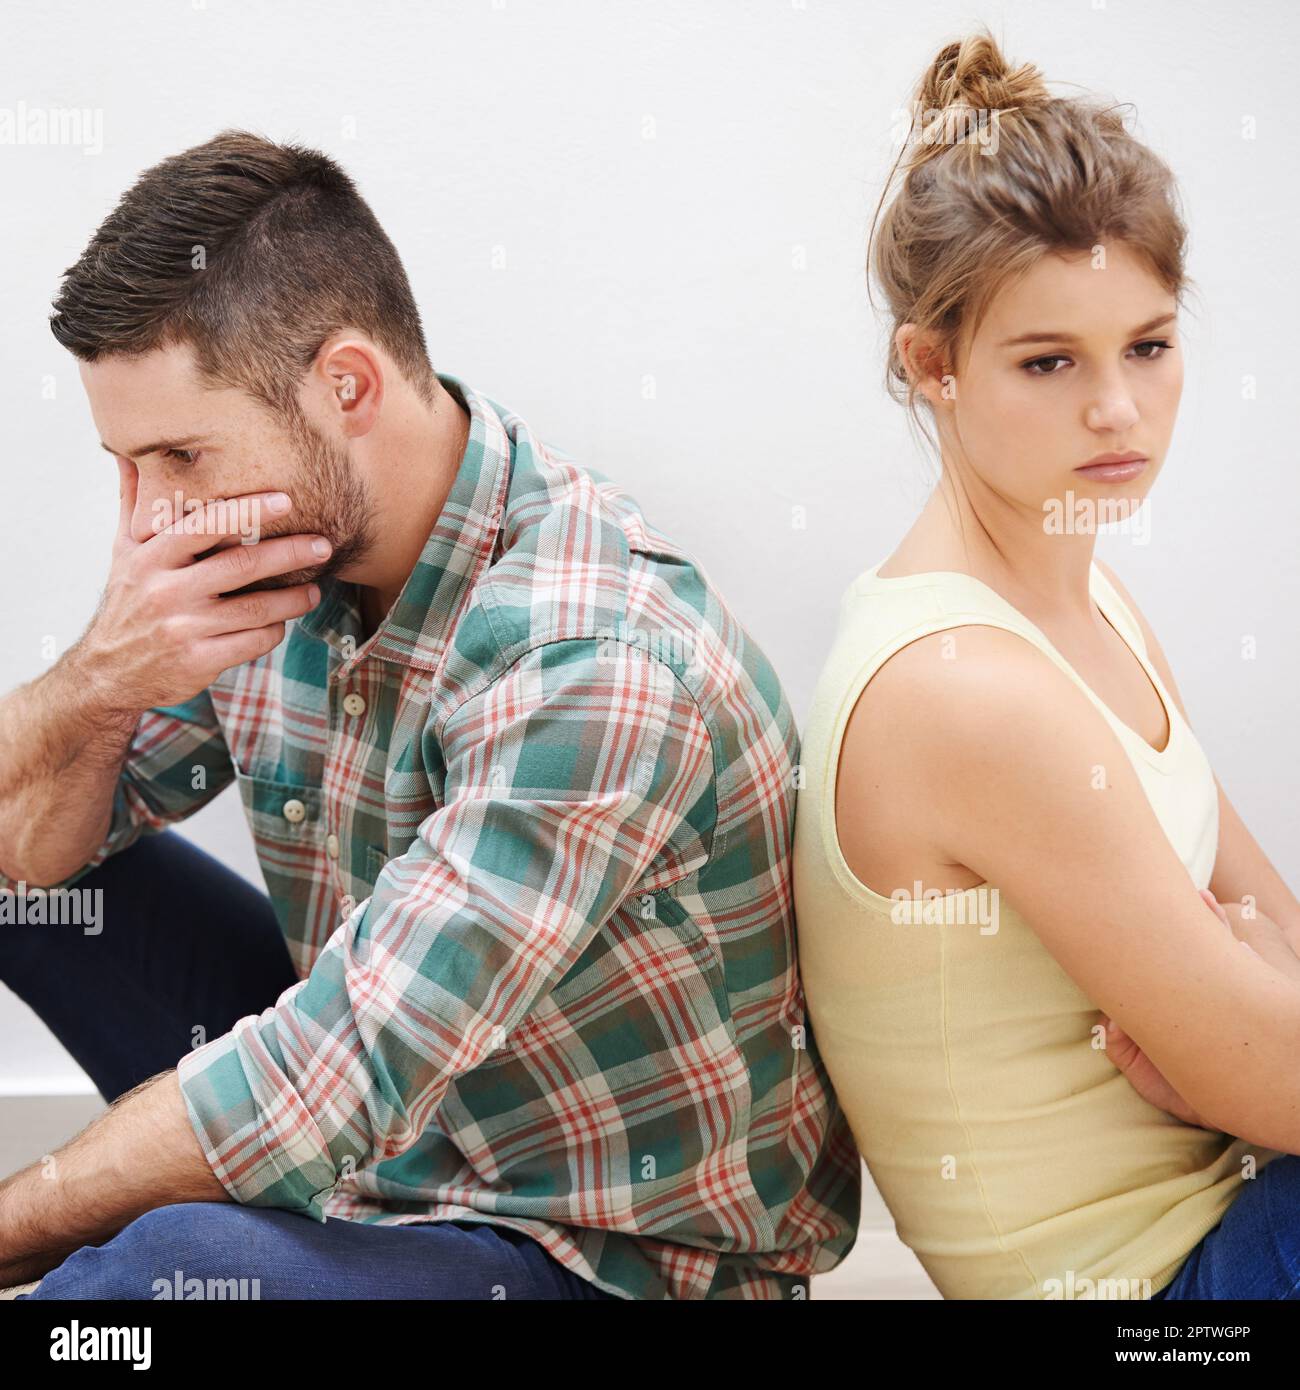 Theyve reached a stalemate. a young couple having relationship difficulties sitting back to back Stock Photo